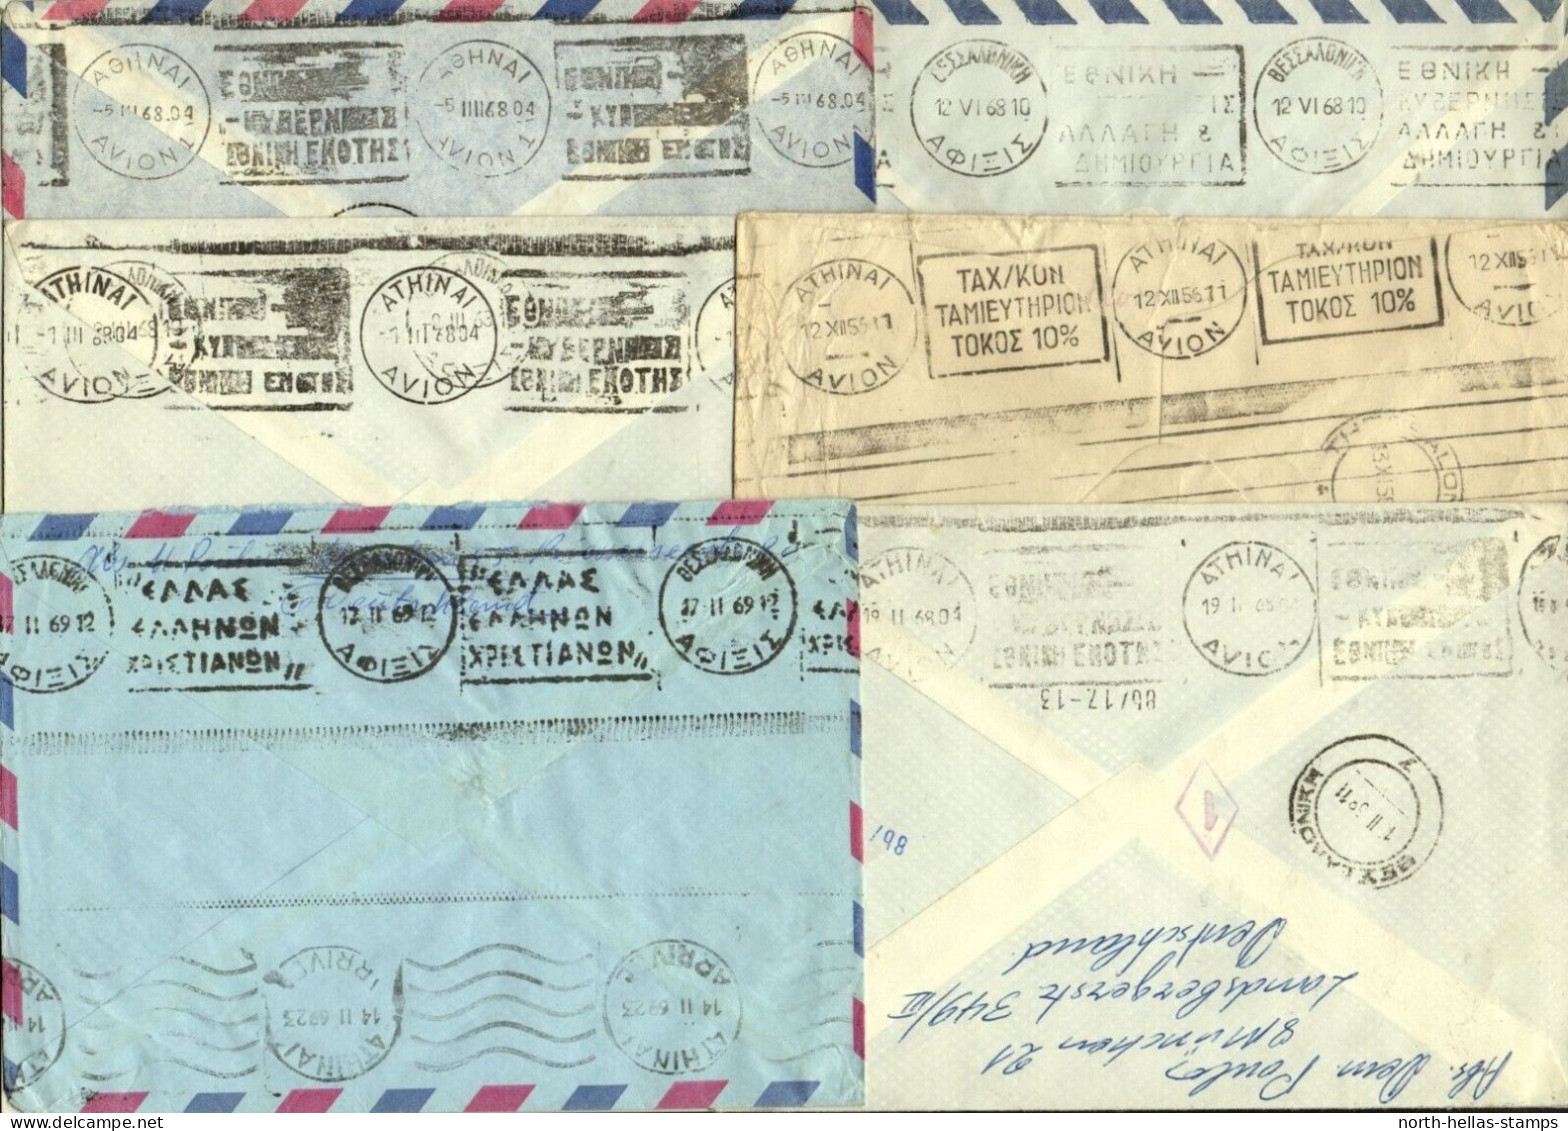 Z047 GREECE 1957-62 Postal history big collection 50 covers attractive postmatks